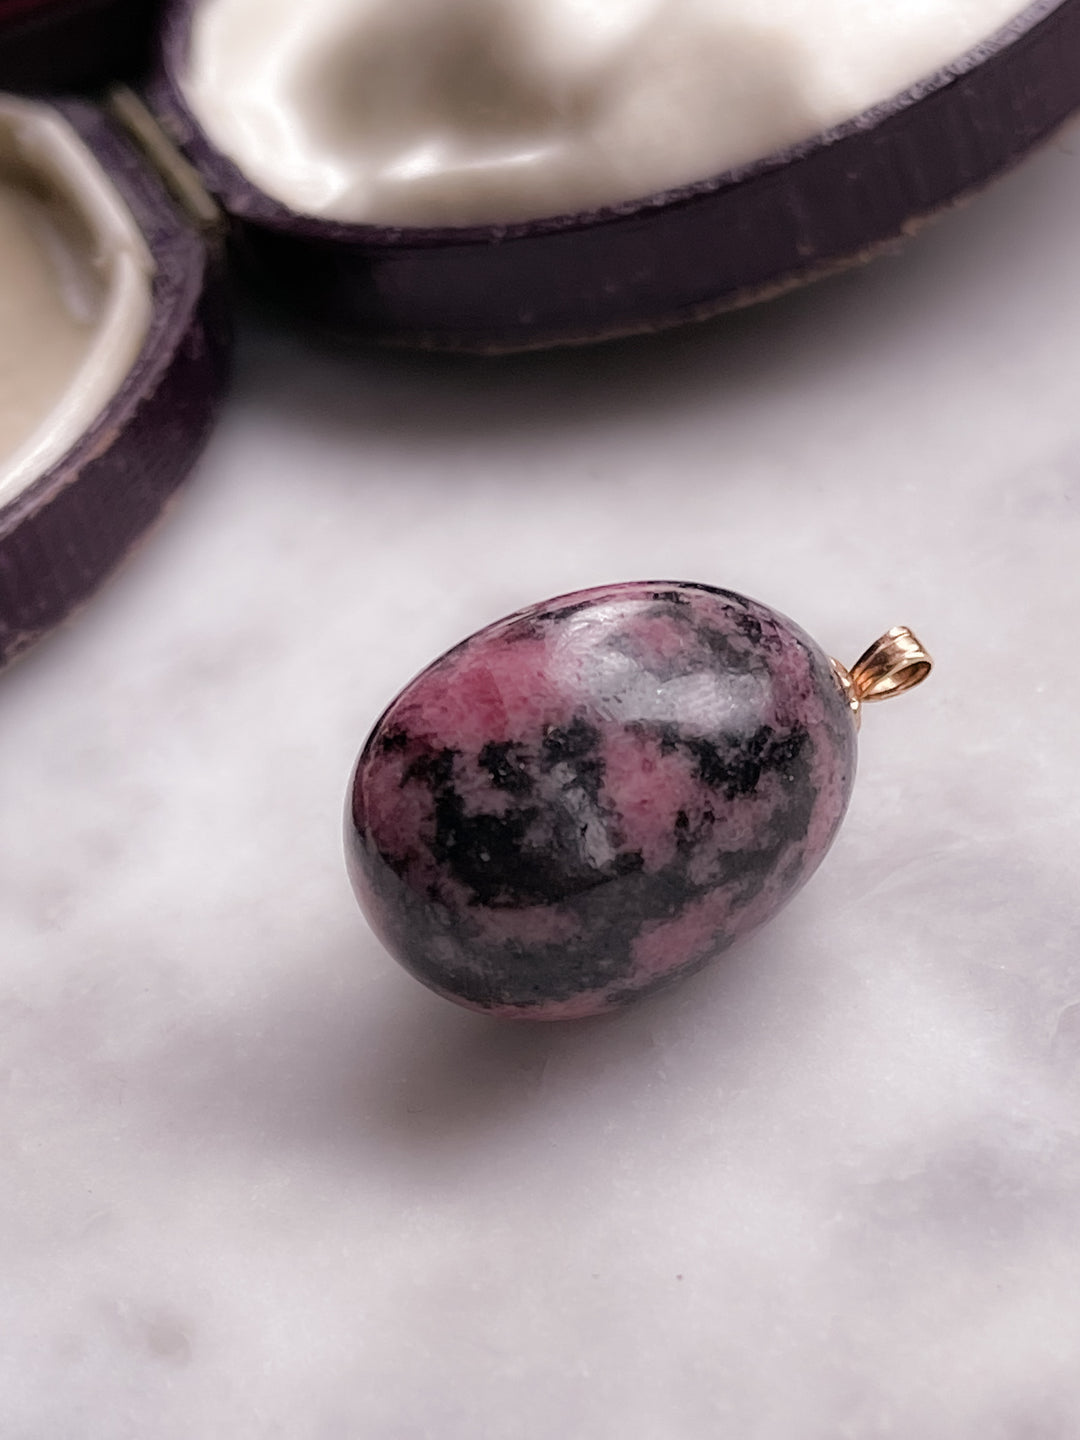 Lovely Late Vintage Pink Rhodochrosite Egg with Black Veining